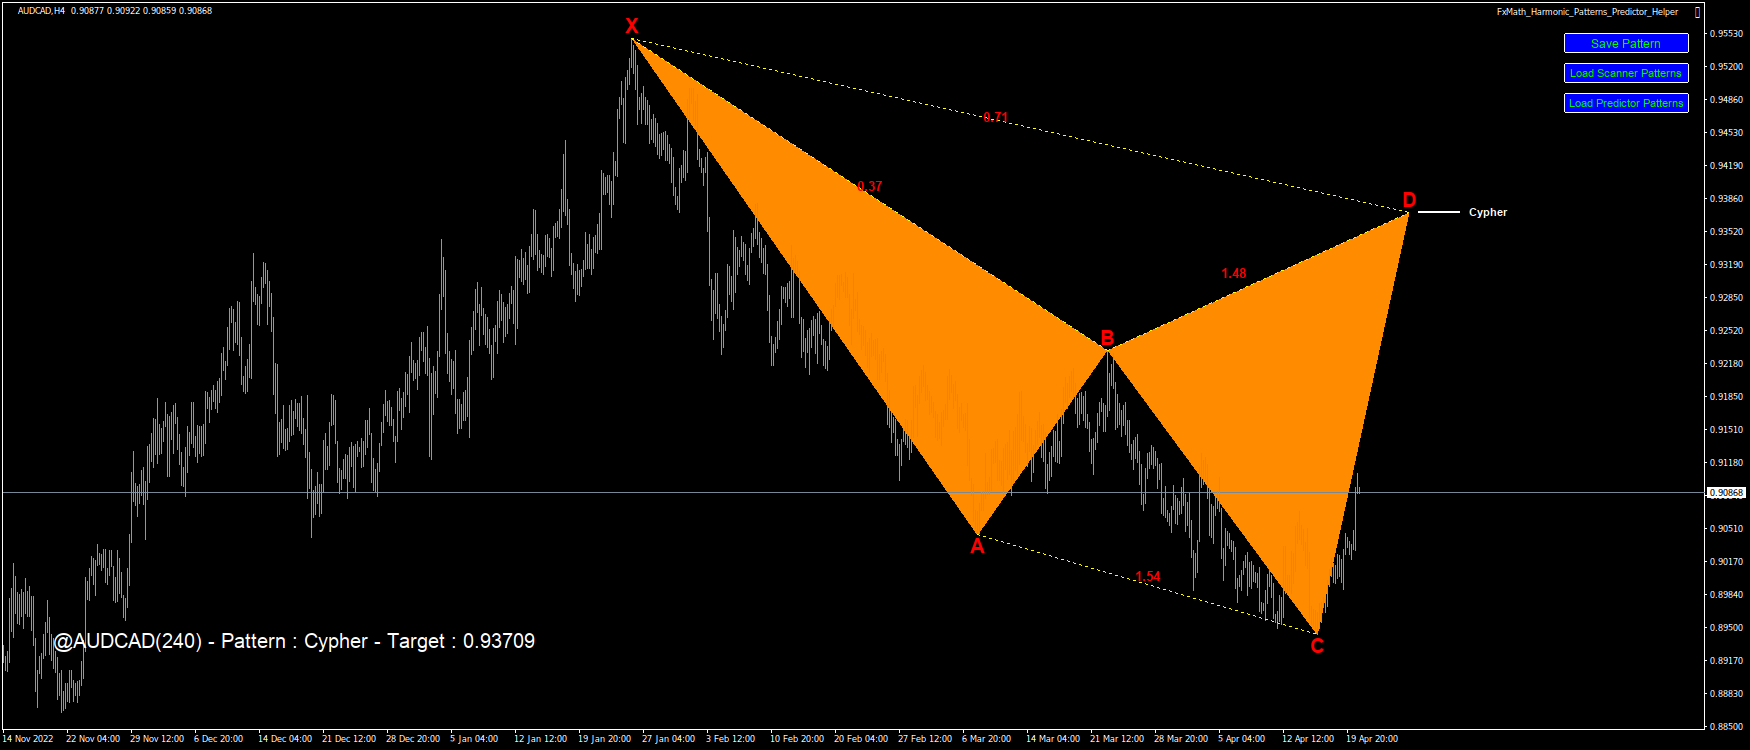 @AUDCAD(240) – Pattern : Cypher – Target : 0.93709-2023.04.20 21:22